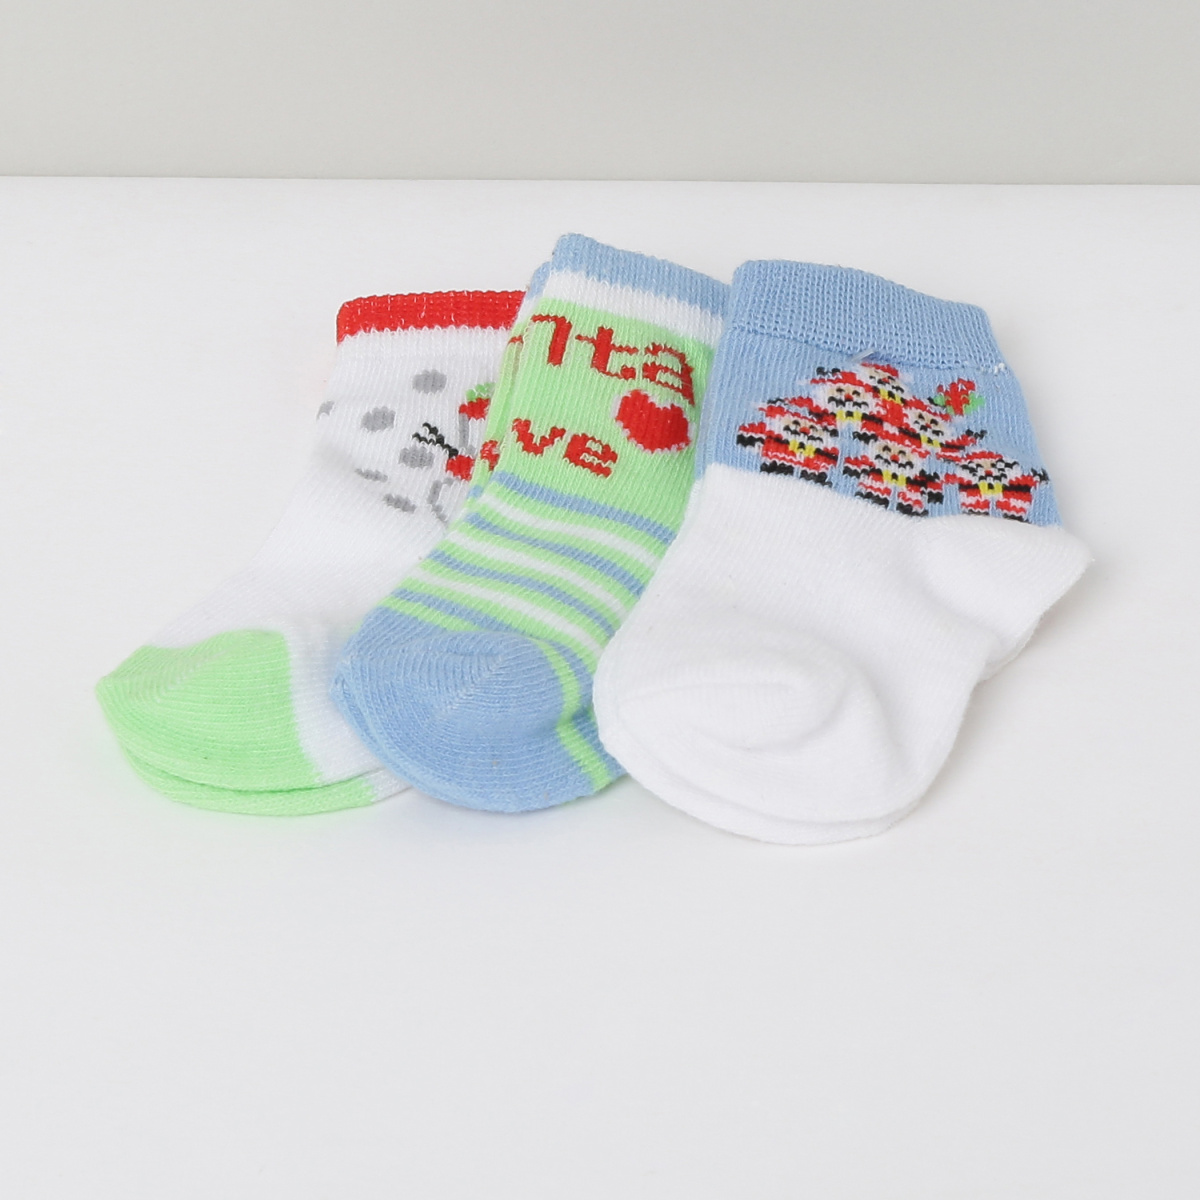 MAX Patterned Knit Socks - Pack of 3